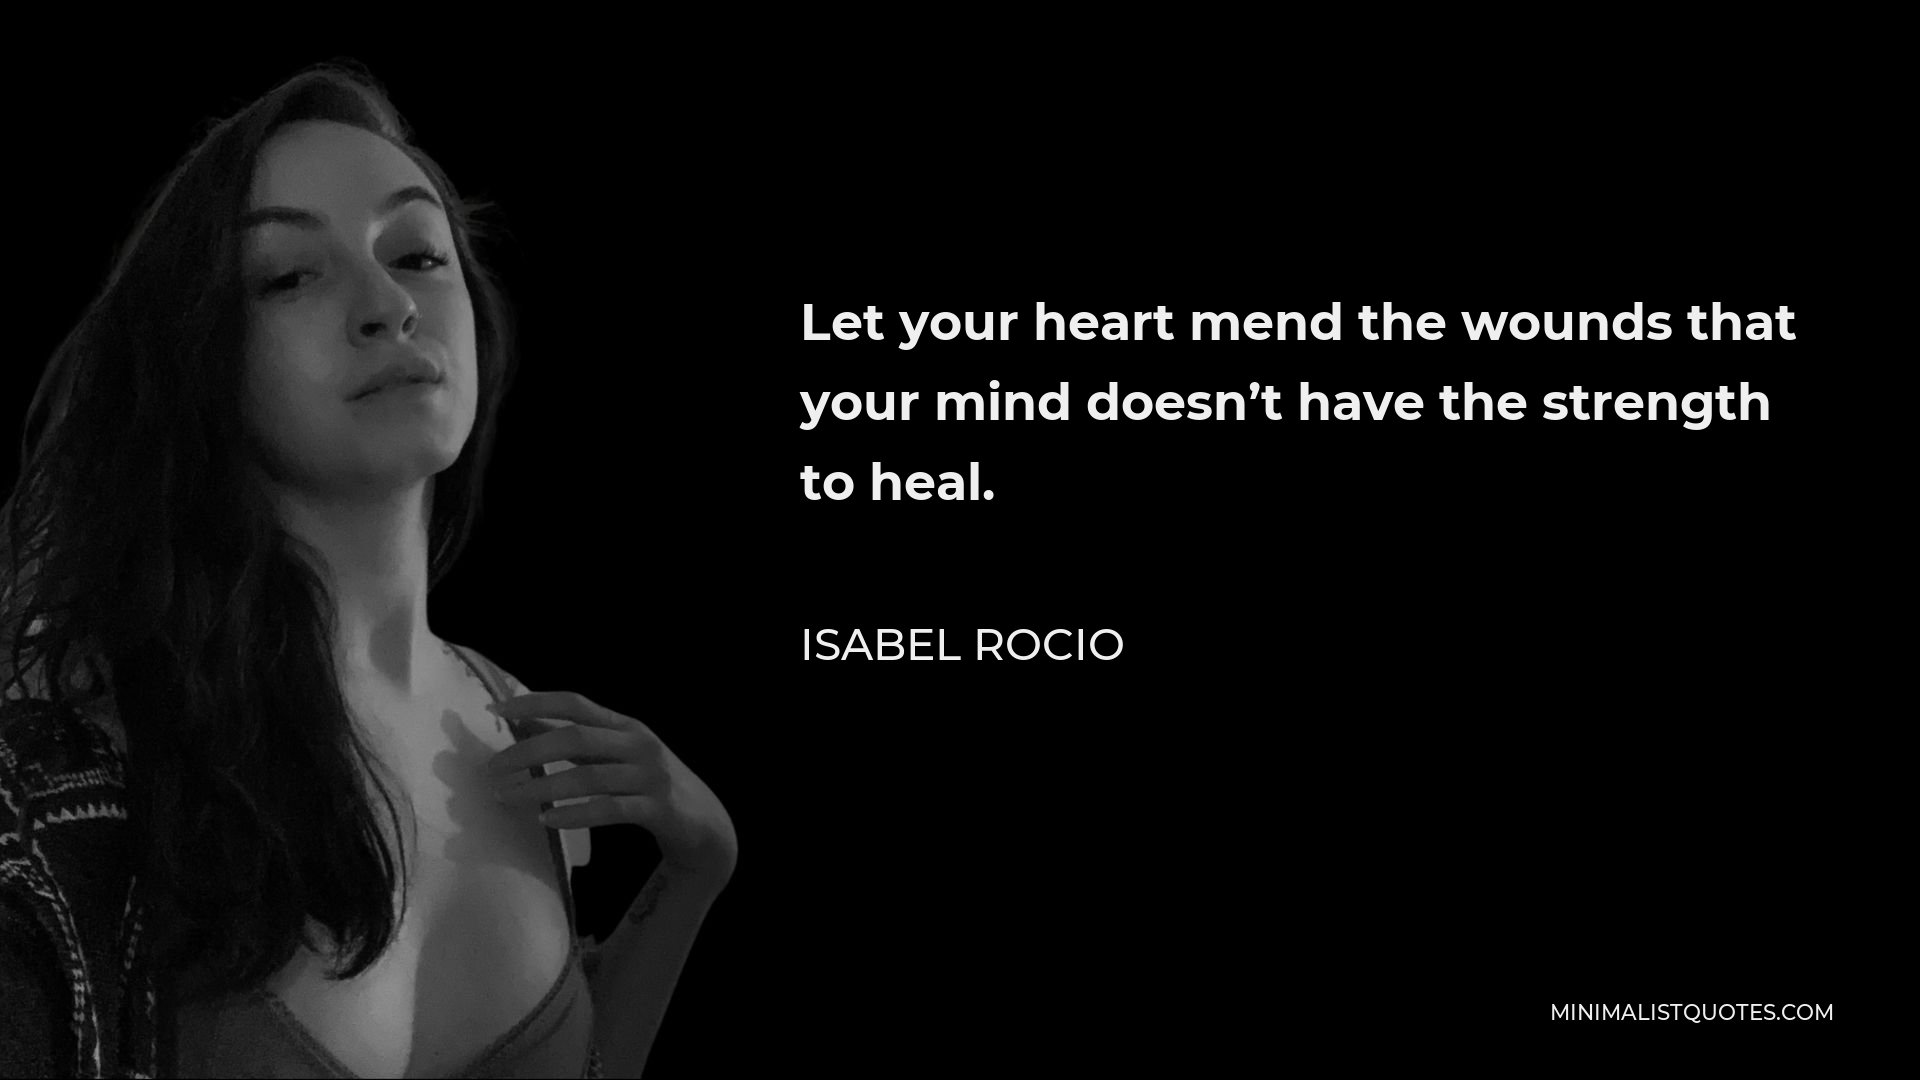 Isabel Rocio Quote - Let your heart mend the wounds that your mind doesn’t have the strength to heal.